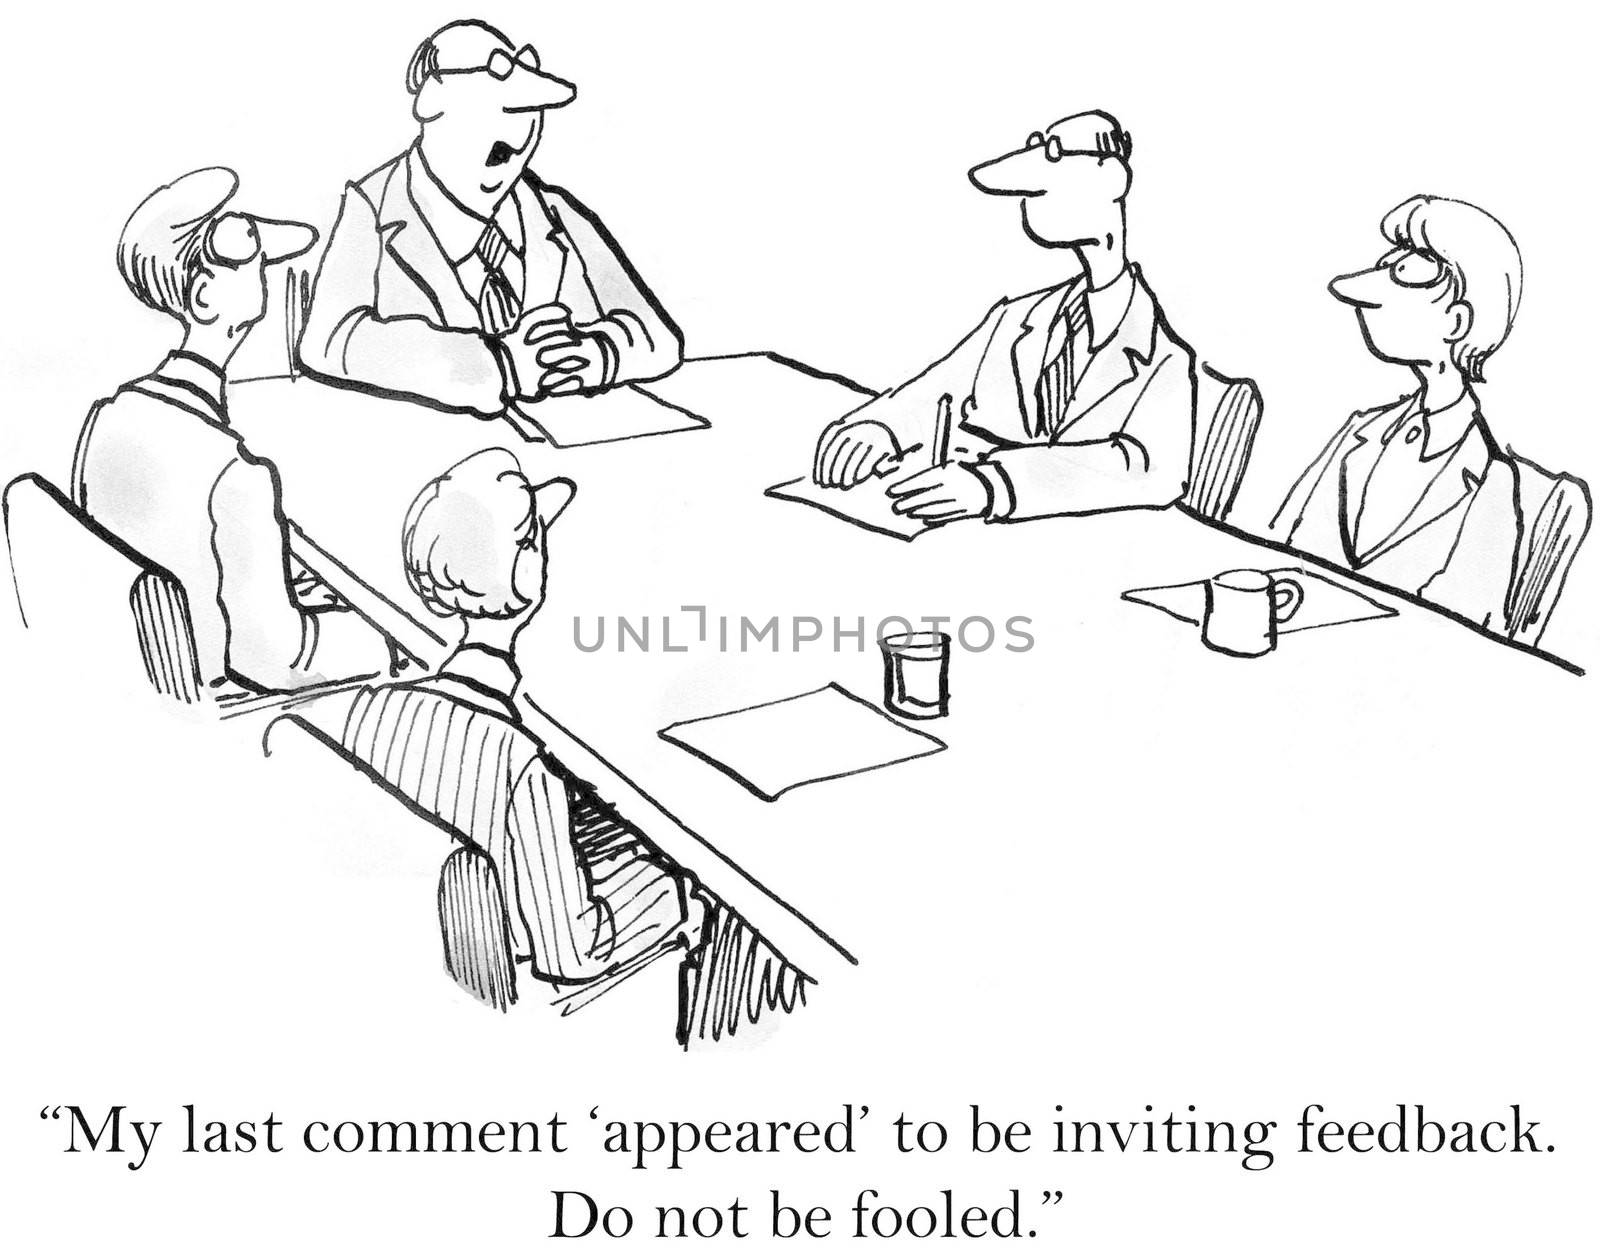 "My last comment 'appeared' to be inviting feedback. Do not be fooled."